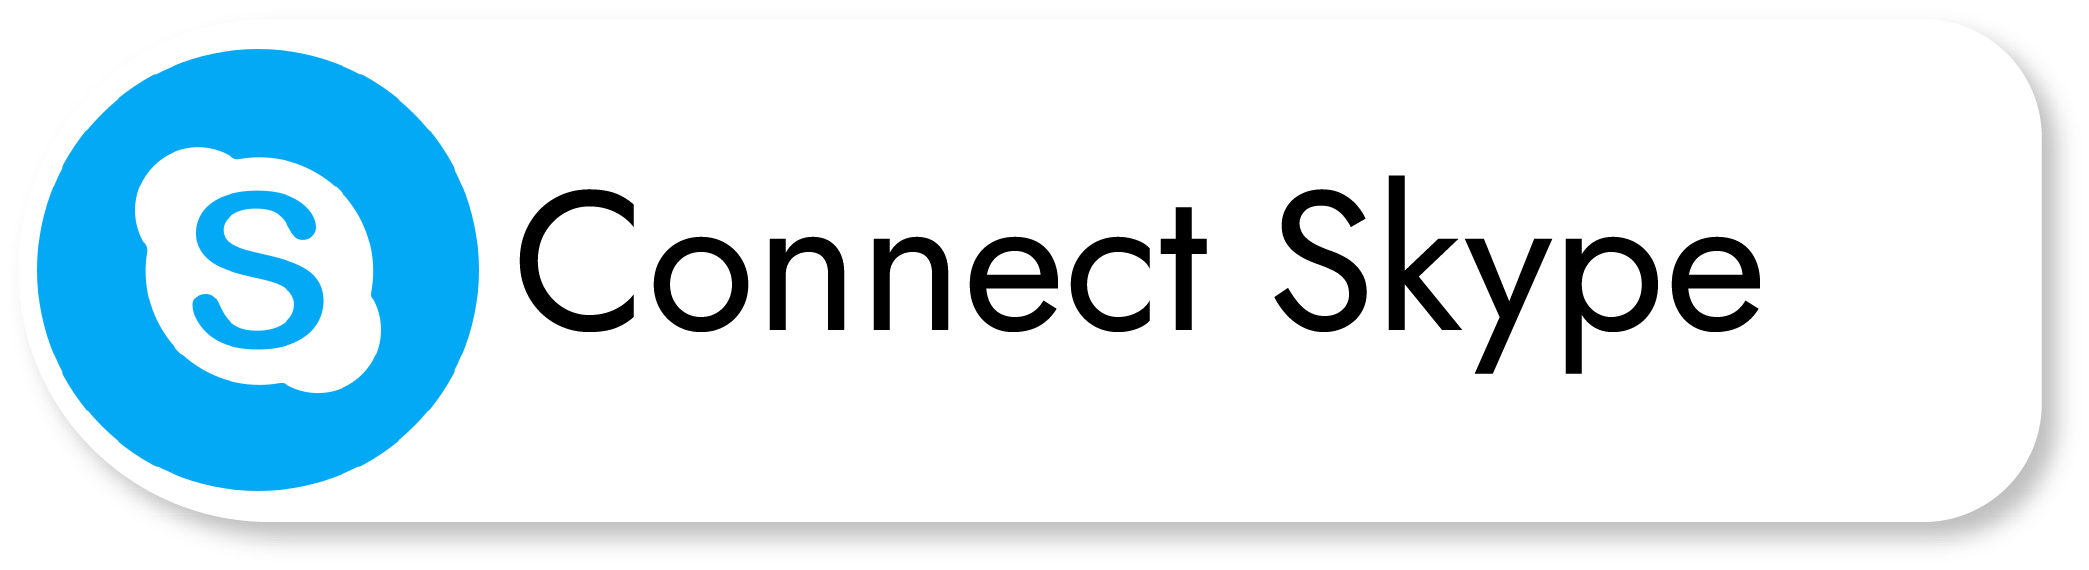 connect skype